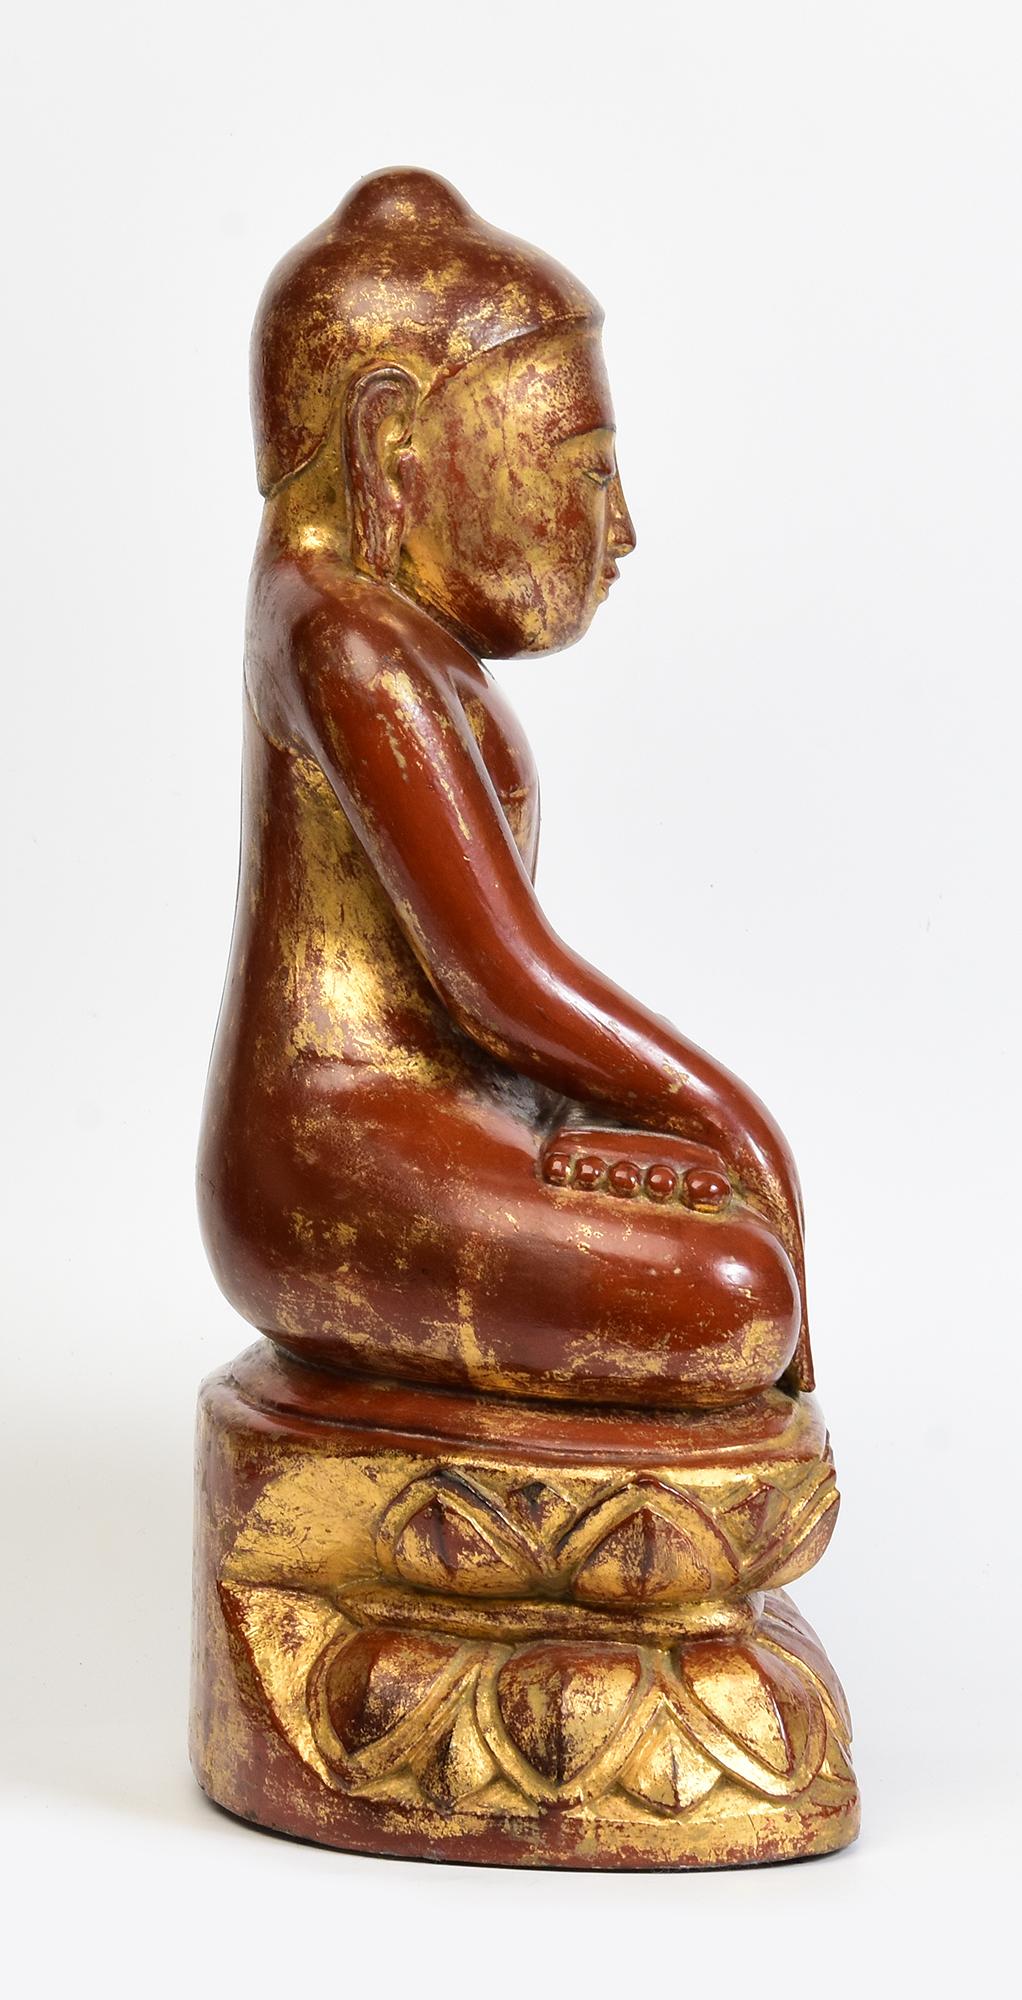 16th C., Ava, Rare Antique Burmese Wooden Seated Buddha on Double Lotus Base For Sale 5